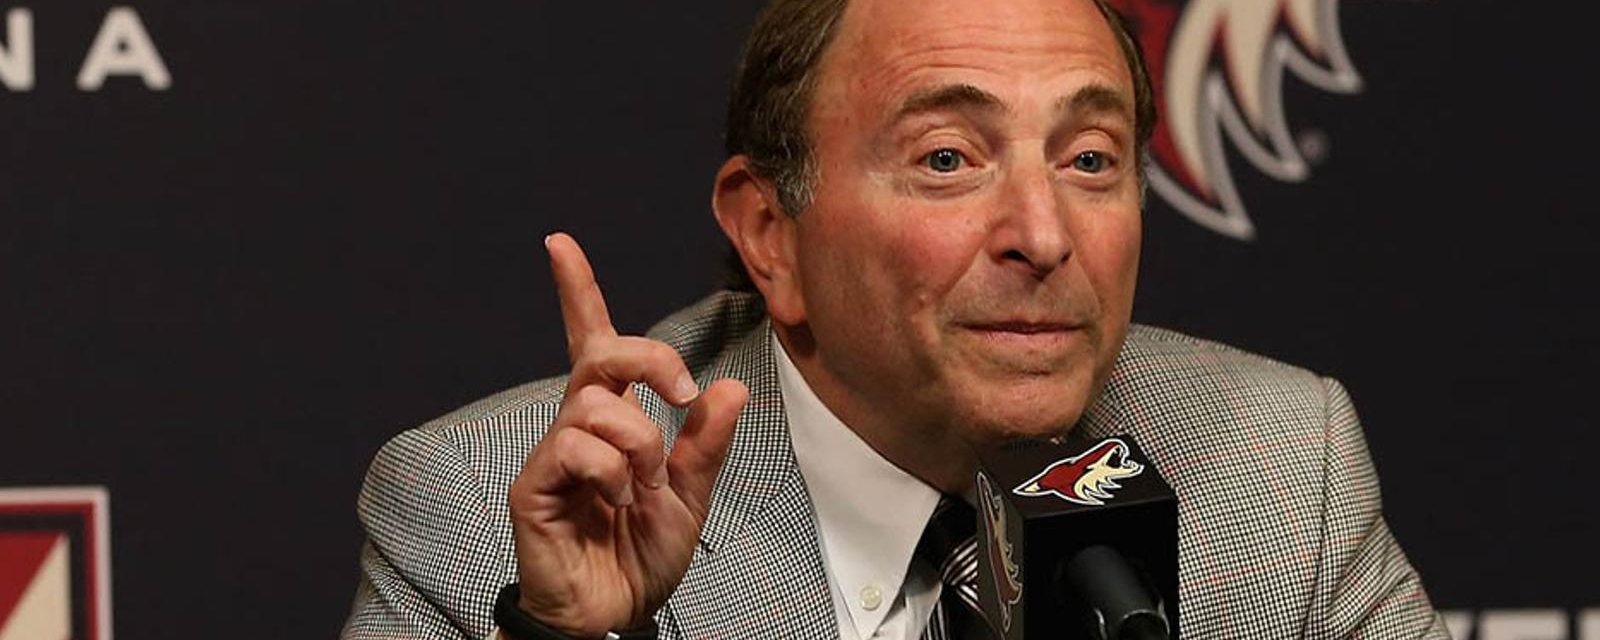 Coyotes' press conference with Bettman gets vandalized by protestors